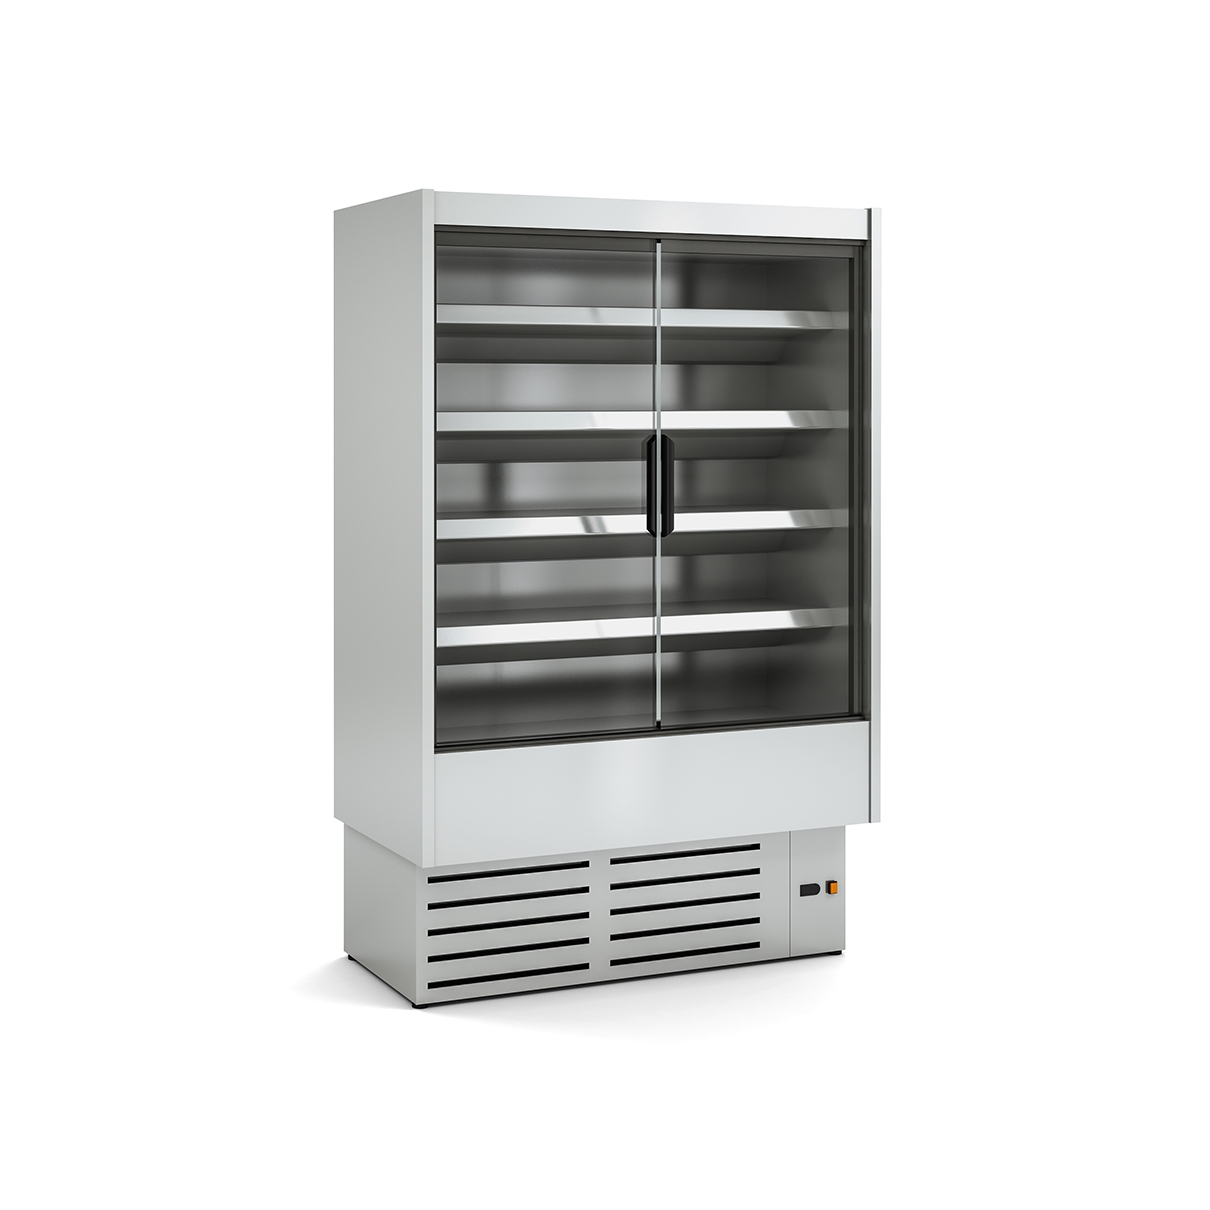 REFRIGERATED WALL-MOUNTED DISPLAY CABINET DG1 M1-M2